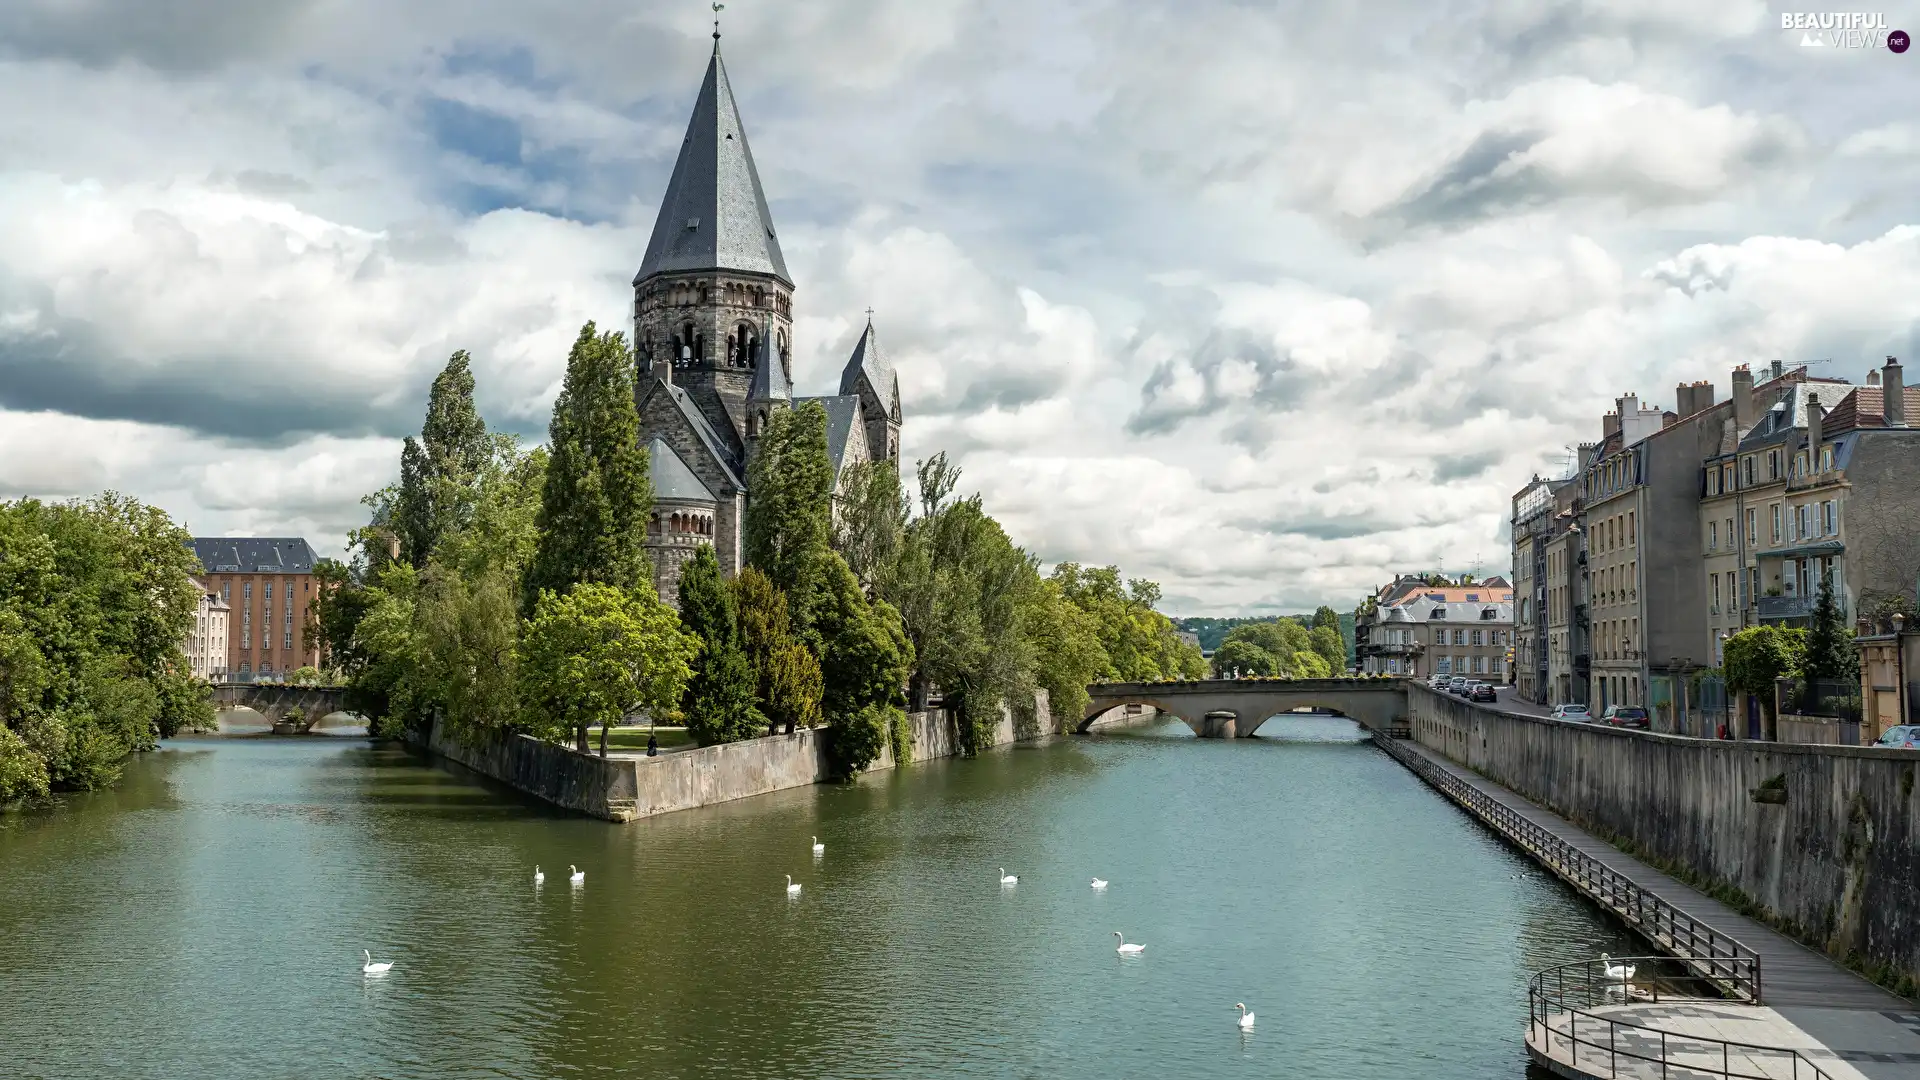 France, Moselle River, Sky, Bridges, viewes, strasbourg, Protestant Church Temple Neuf, trees